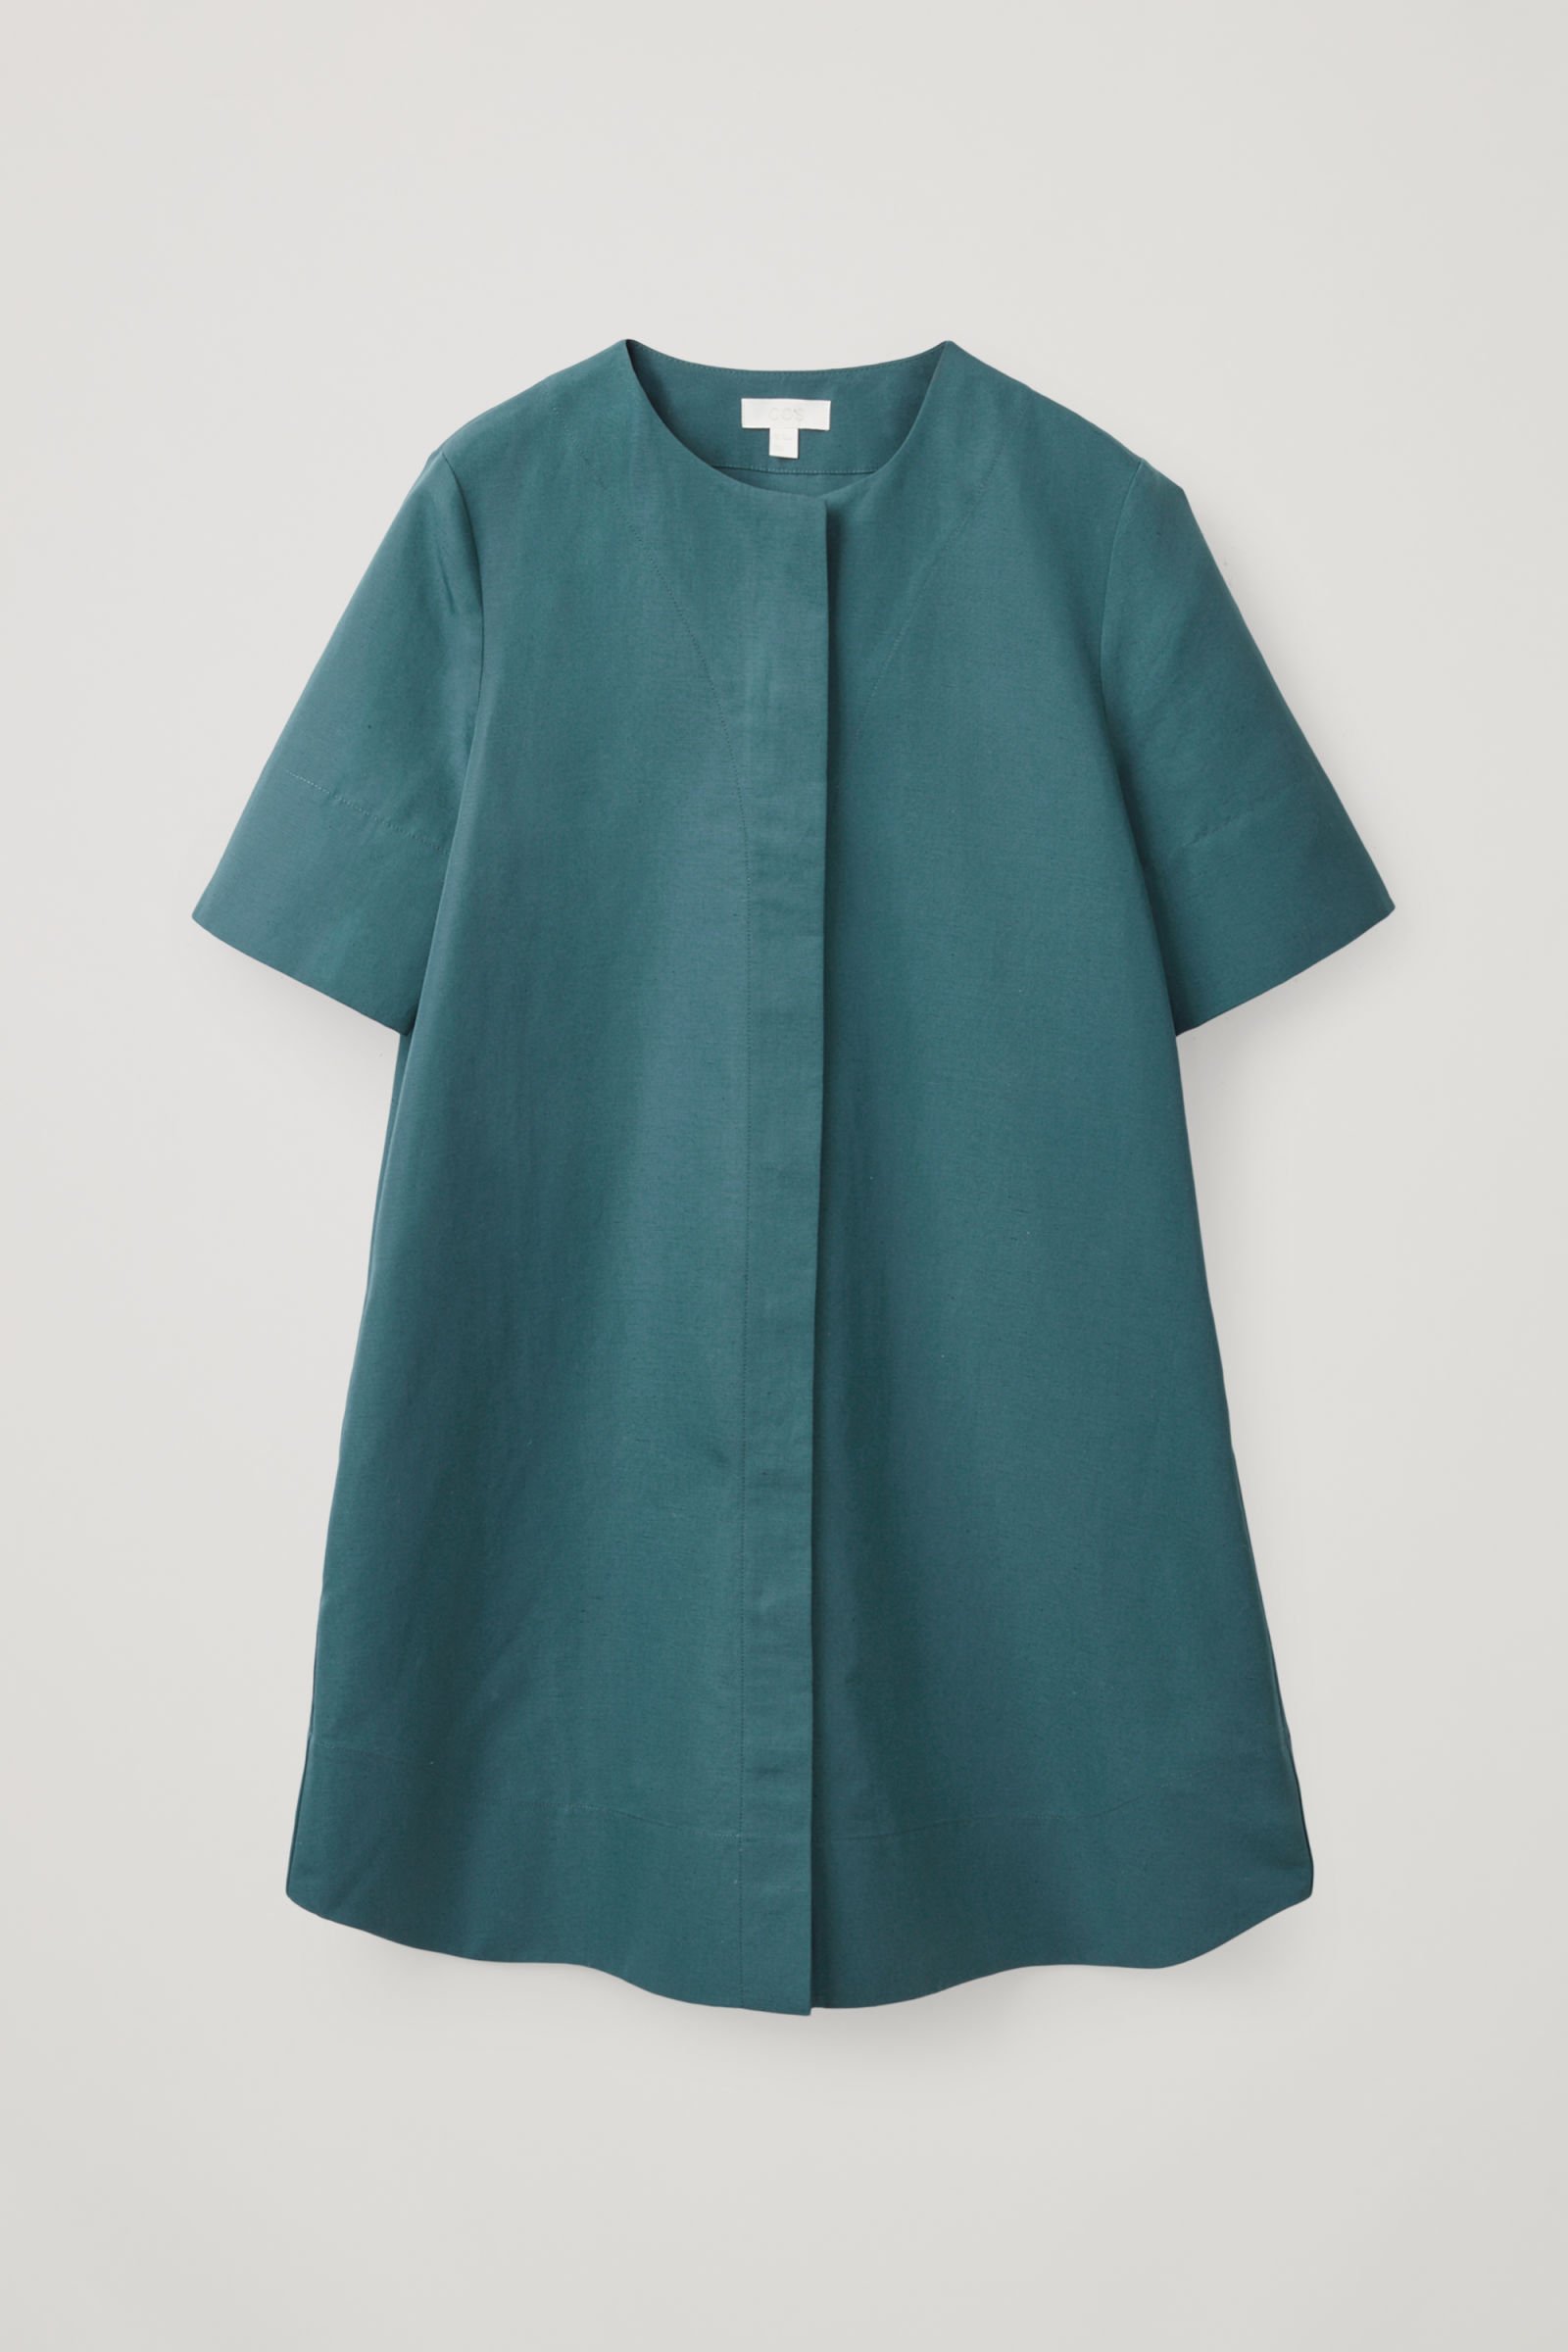 COS A-Line Shirt Dress in Turquoise | Endource